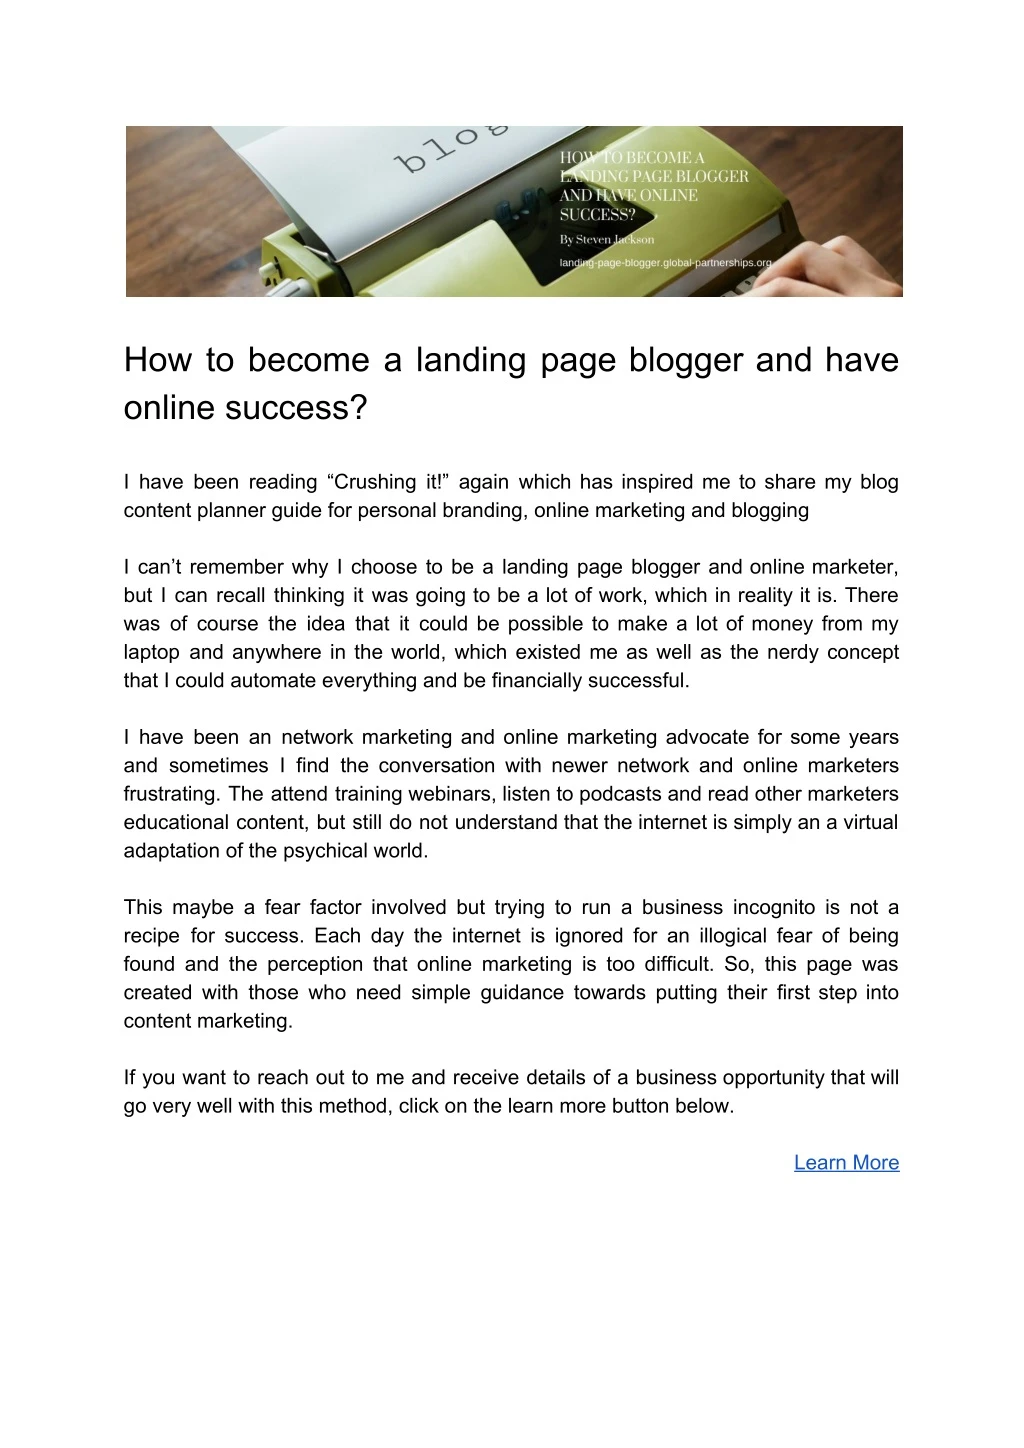 how to become a landing page blogger and have